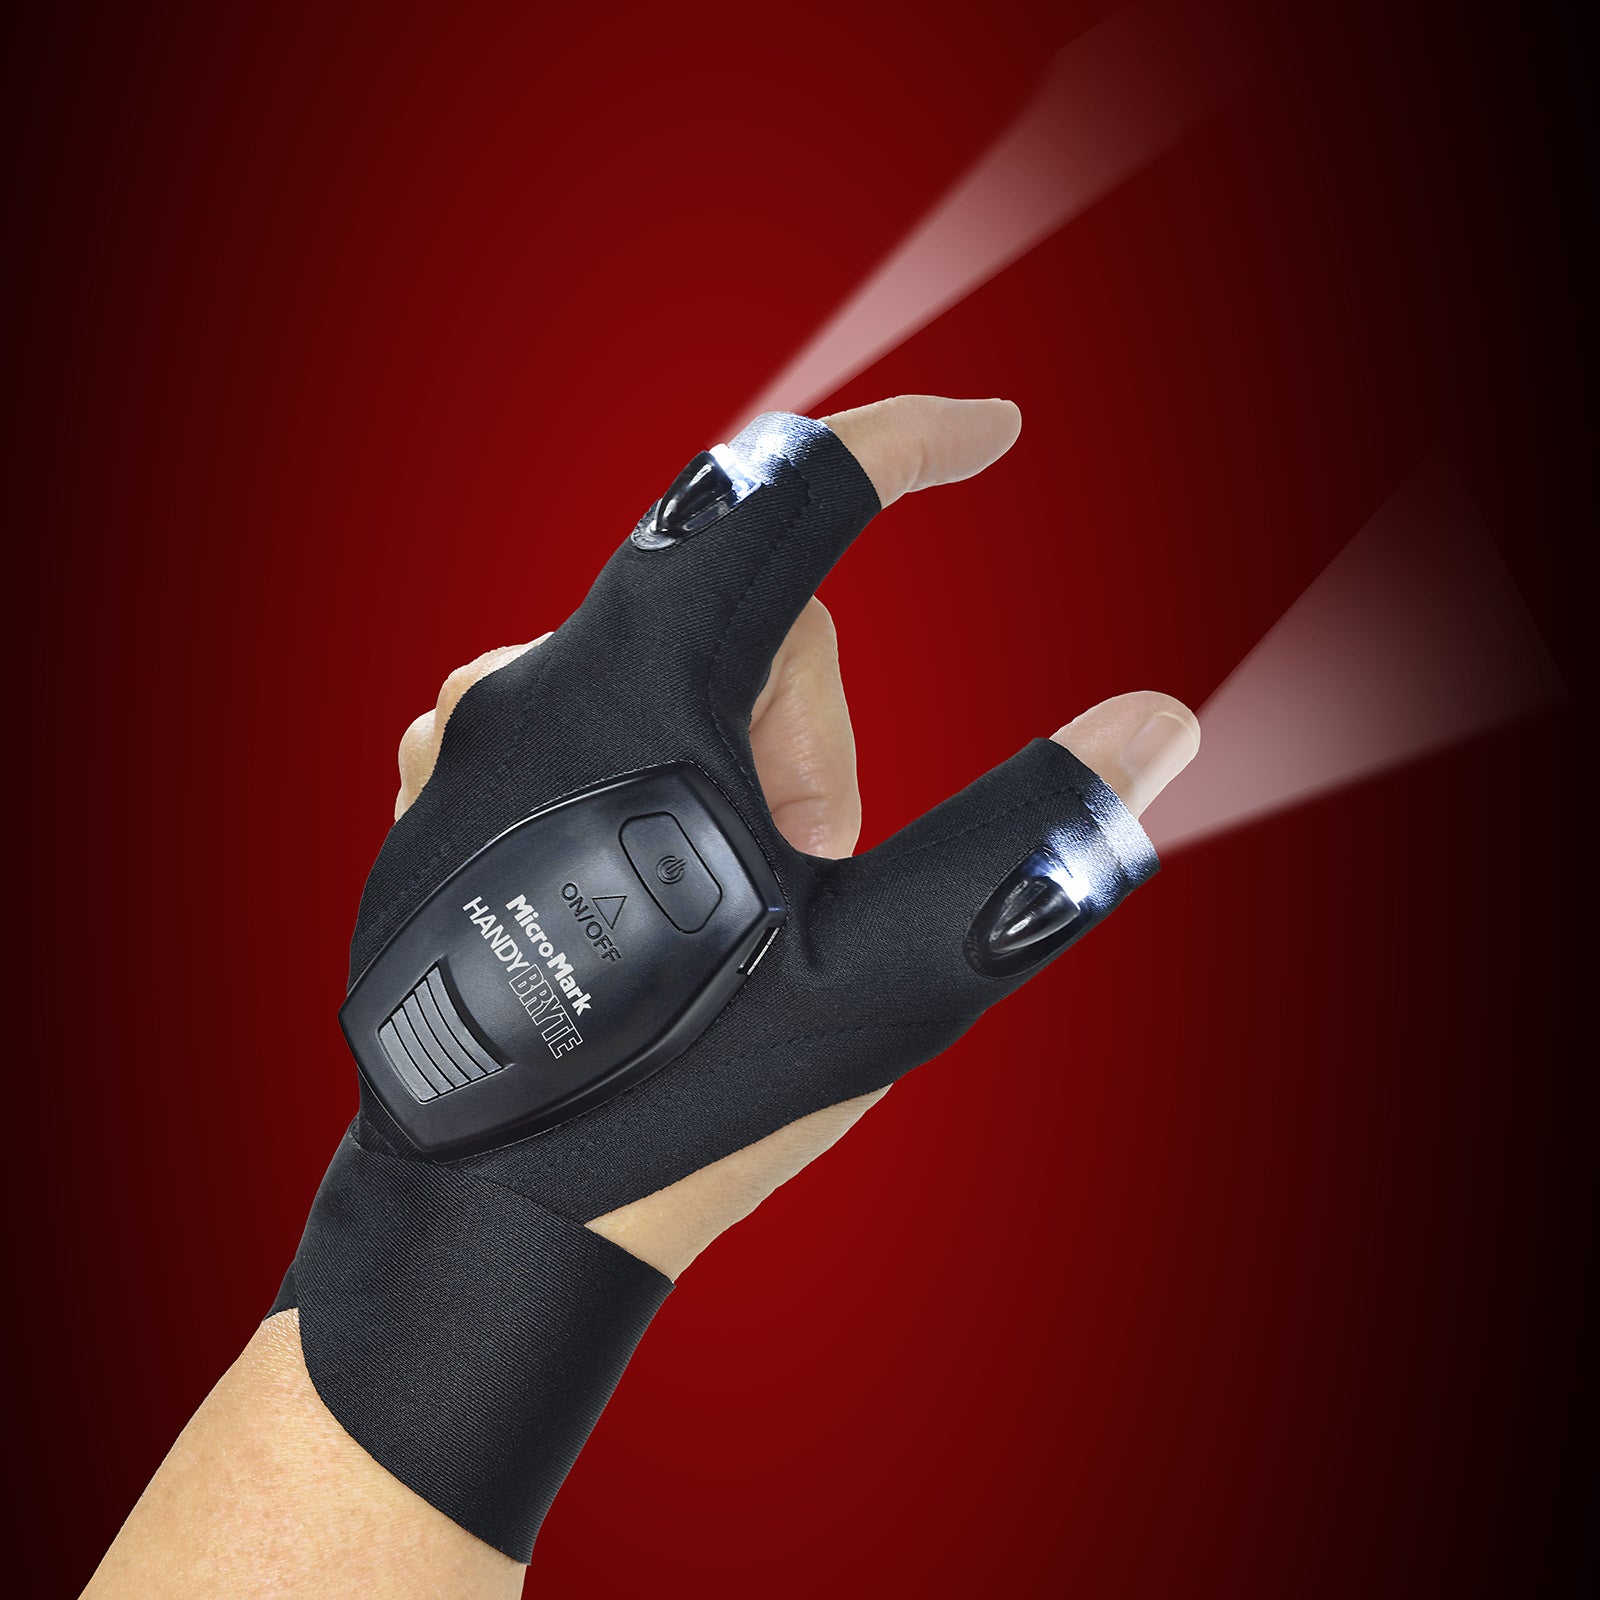 HandyBRYTE Glove - Mounted LED Light System by Micro - Mark - Micro - Mark Hobby Supplies